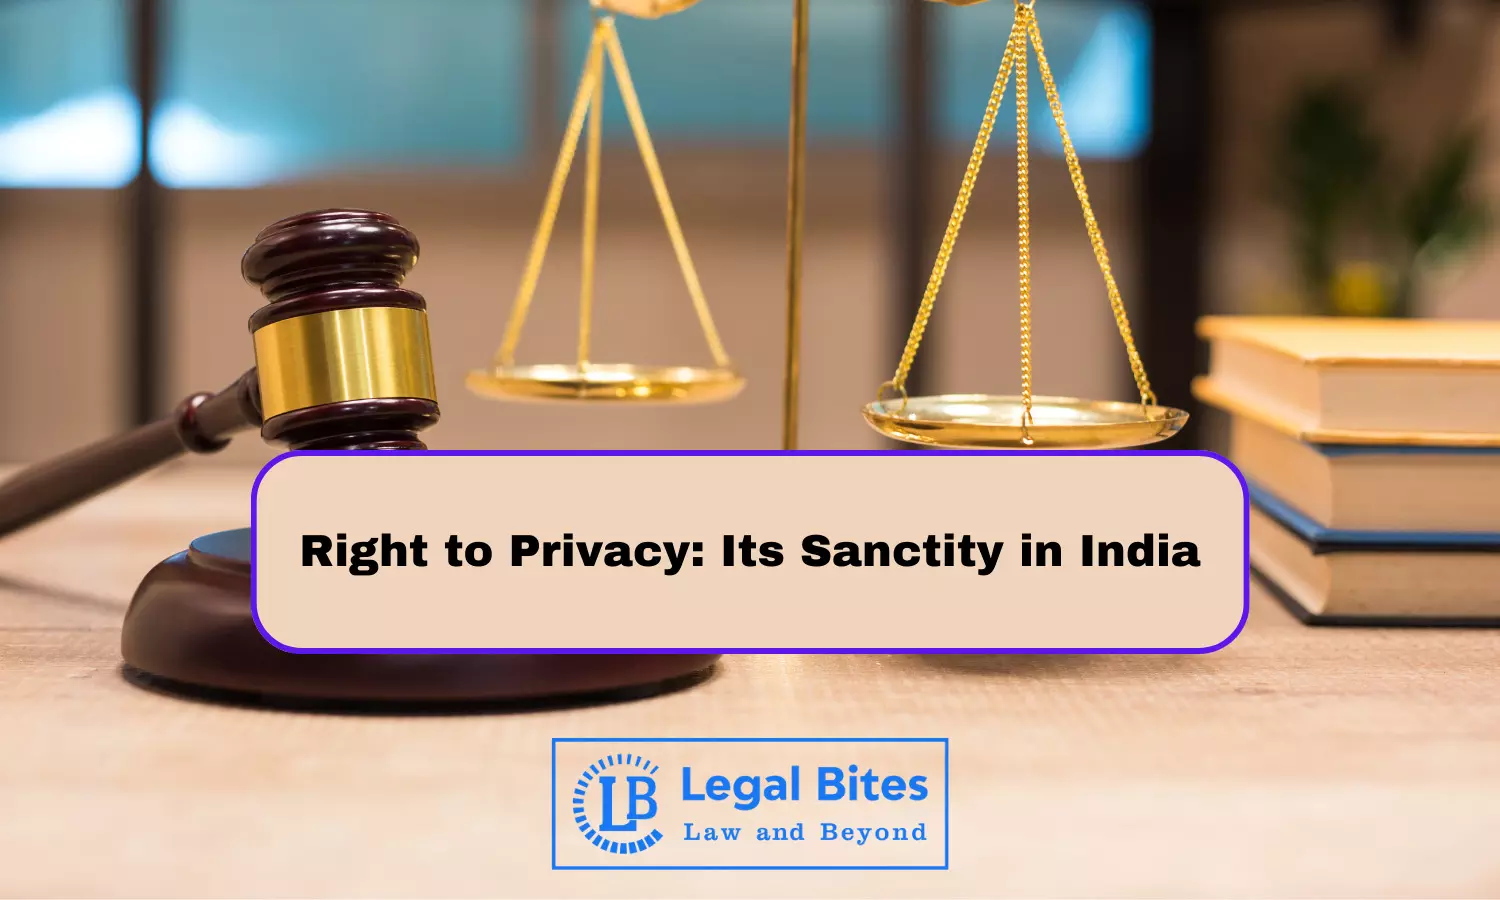 Right to Privacy: Its Sanctity in India